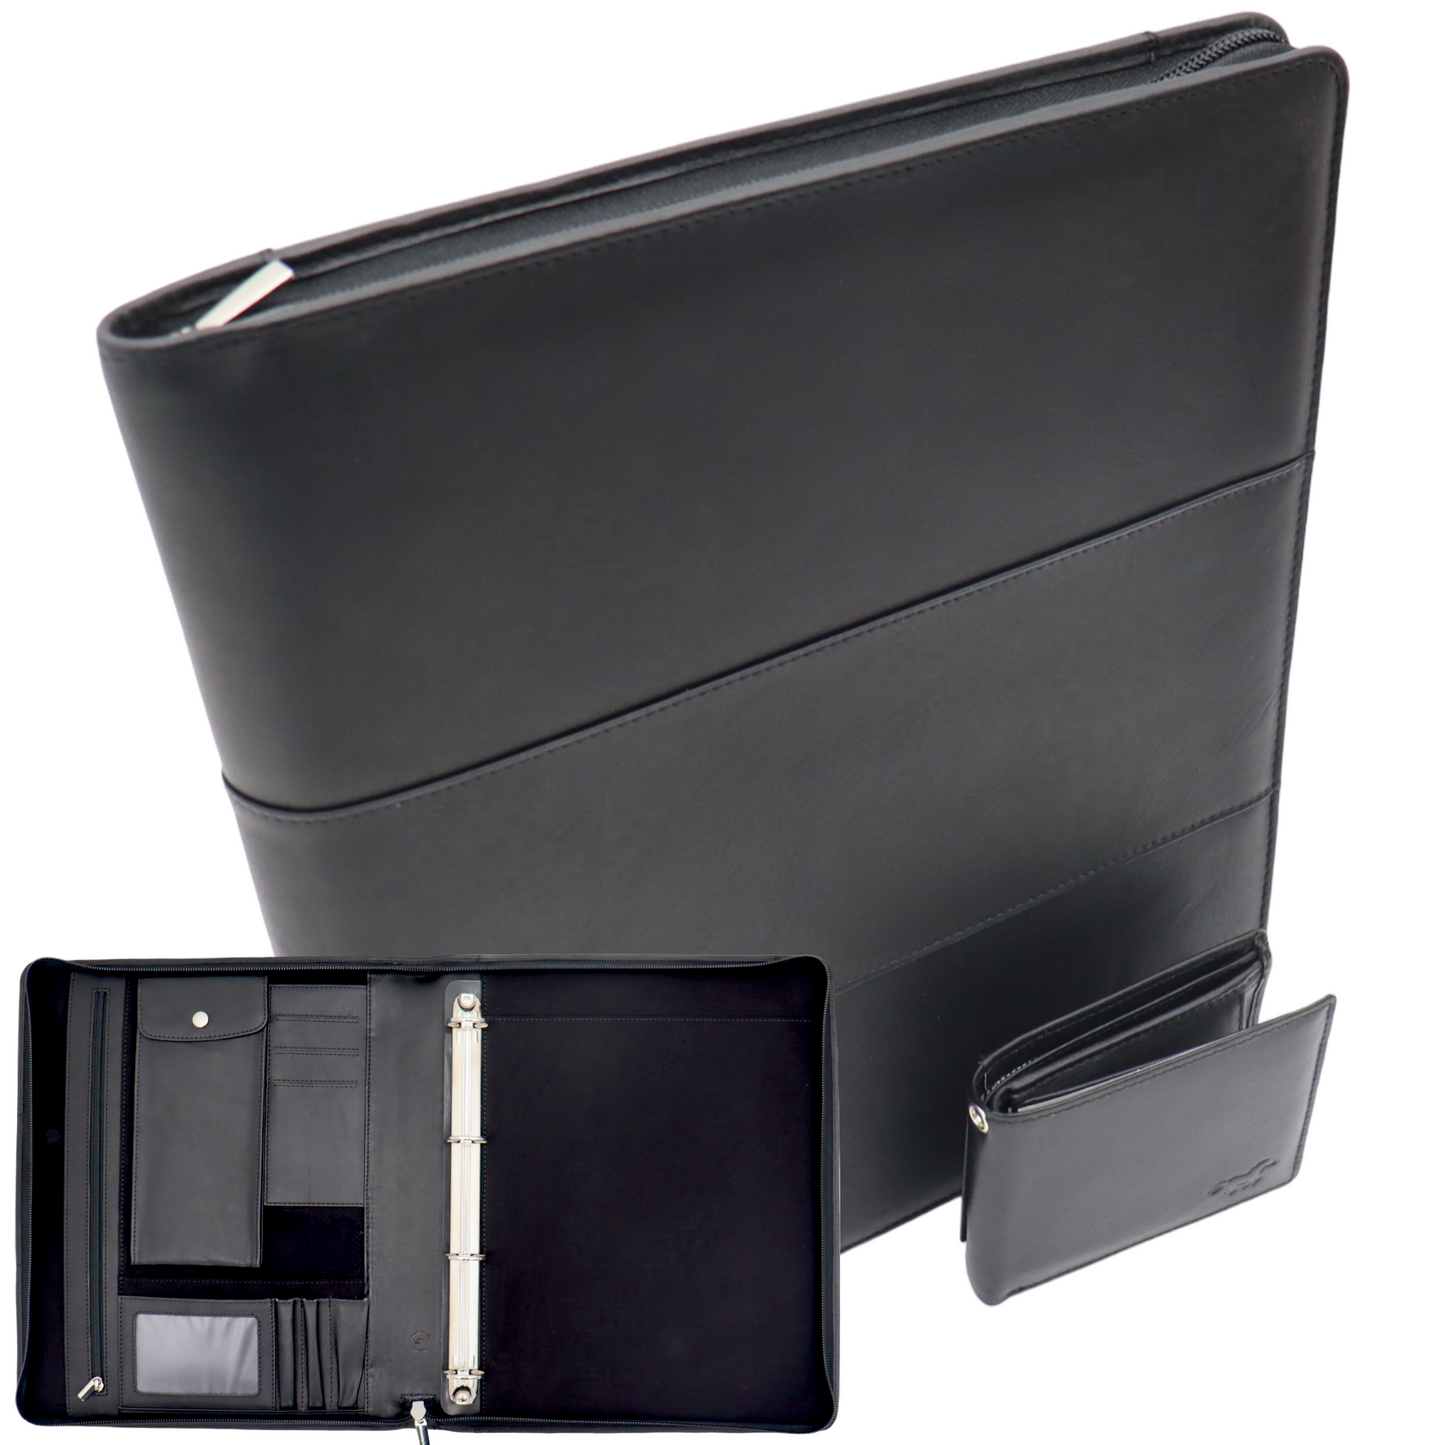 Business 3 set: Leather Writing Case A4 with Pasjsesholder &amp; Anti-lost Keyfinder - 3 pcs